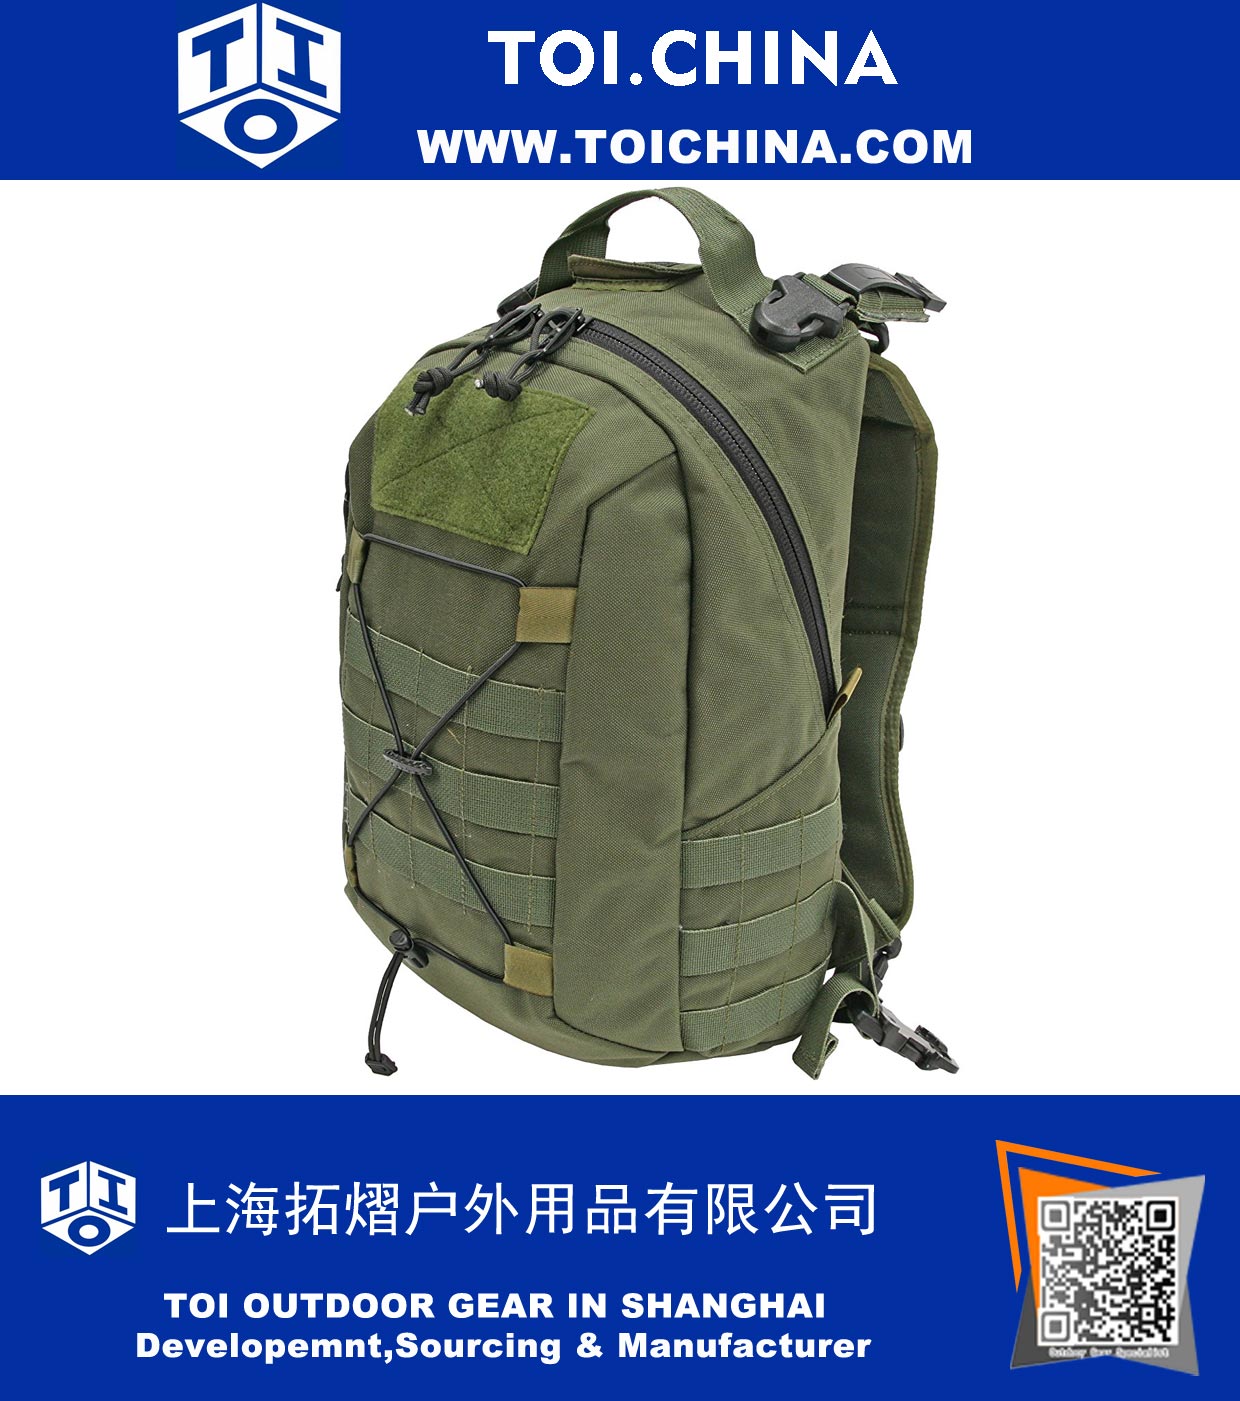 Tactical Tailor Operator Removable Pack